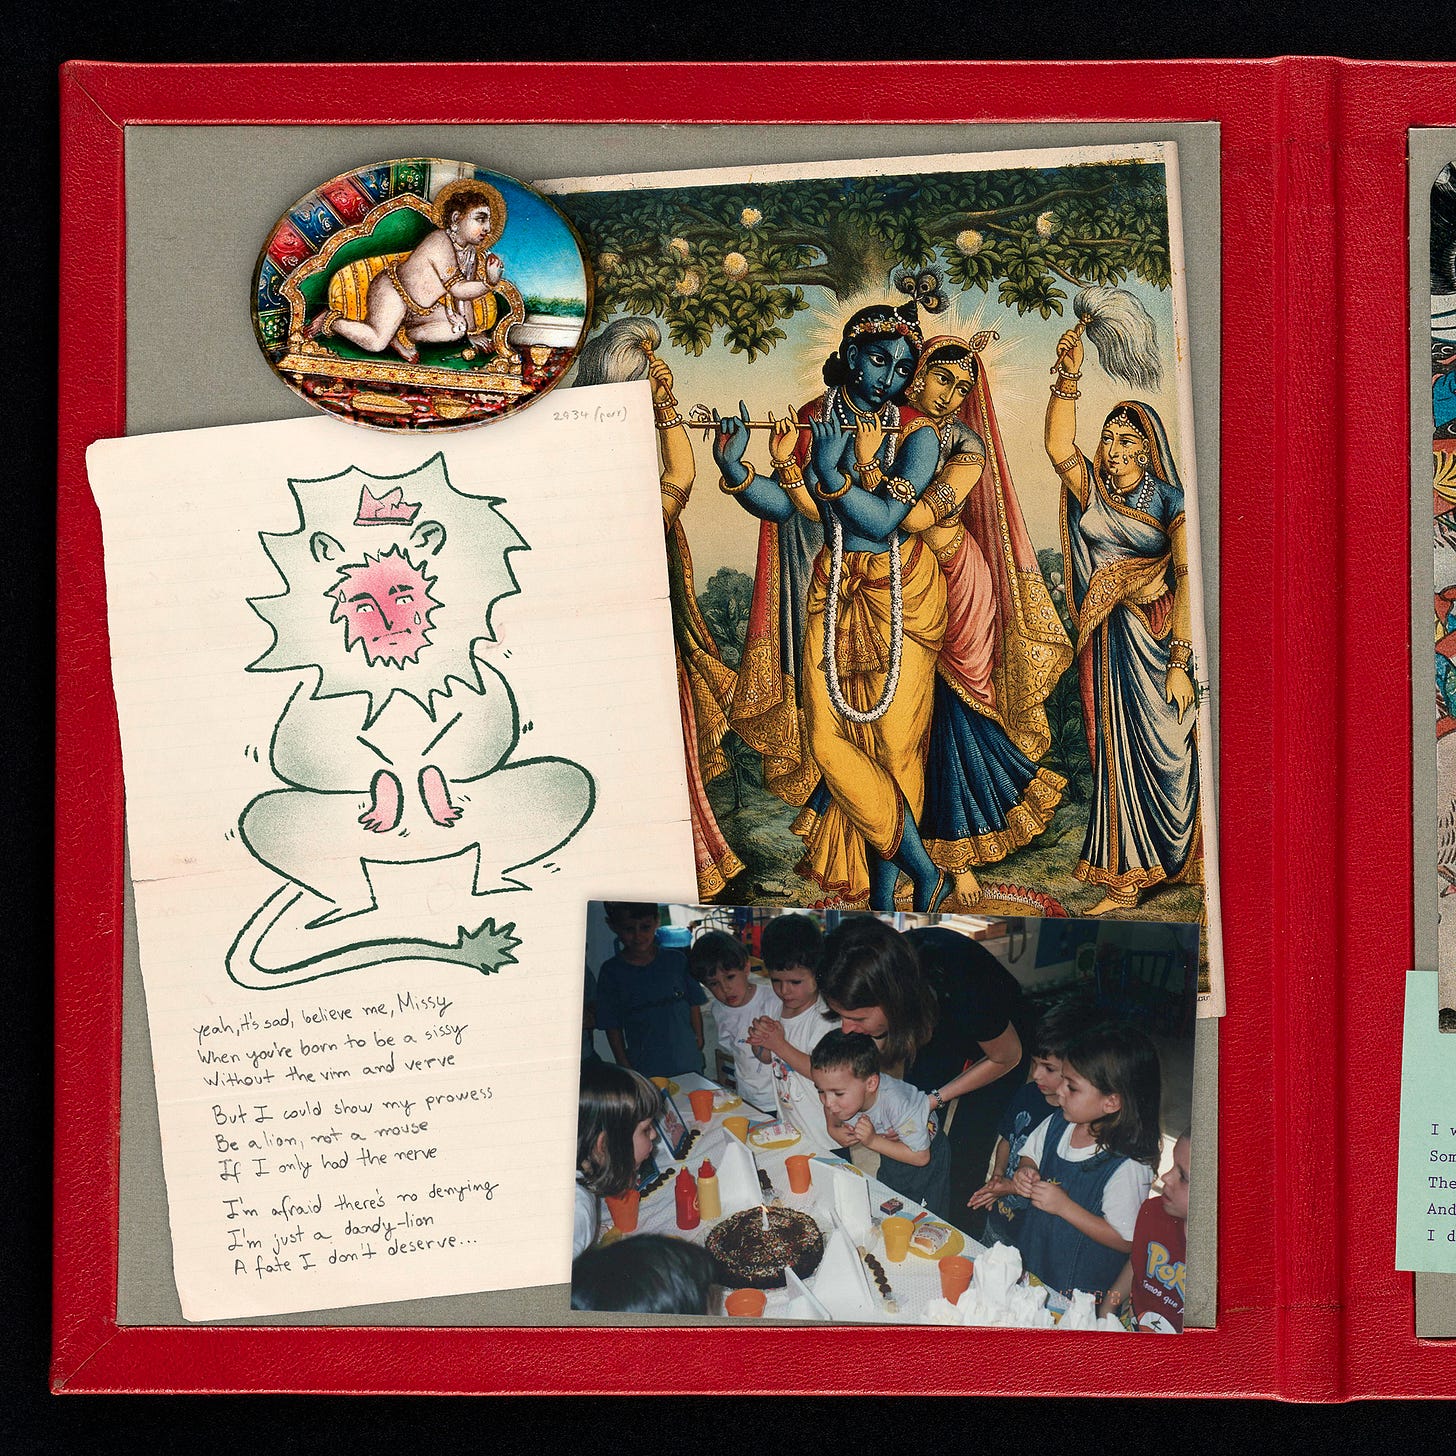 It is a zoomed version of the first image and focuses on its left side. There is a photograph depicting a child’s birthday; a notebook paper drawing of a person dressed as a lion looking distressed, accompanying some handwritten lyrics from If I Only Had the Nerve from The Wizard of Oz; and two Hindu illustrations of Bala Krishna and Radha Krishna, respectively.